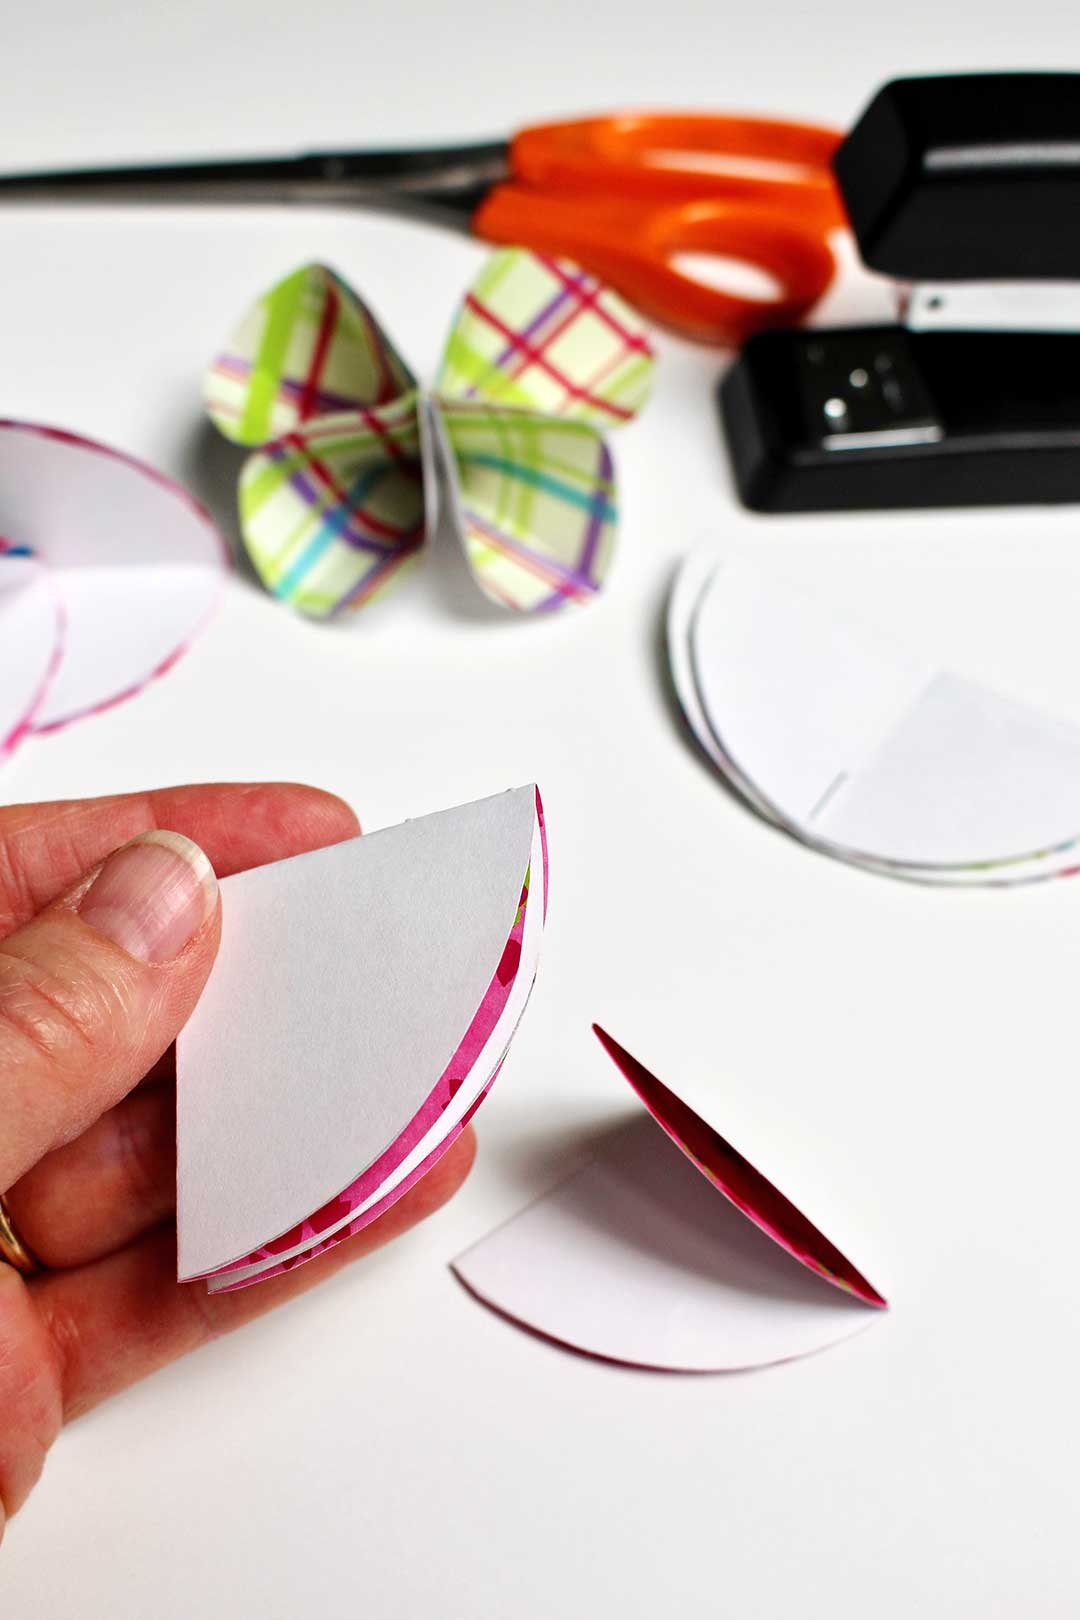 A circle of paper folded into quarters near a stapler and a pair of scissors.